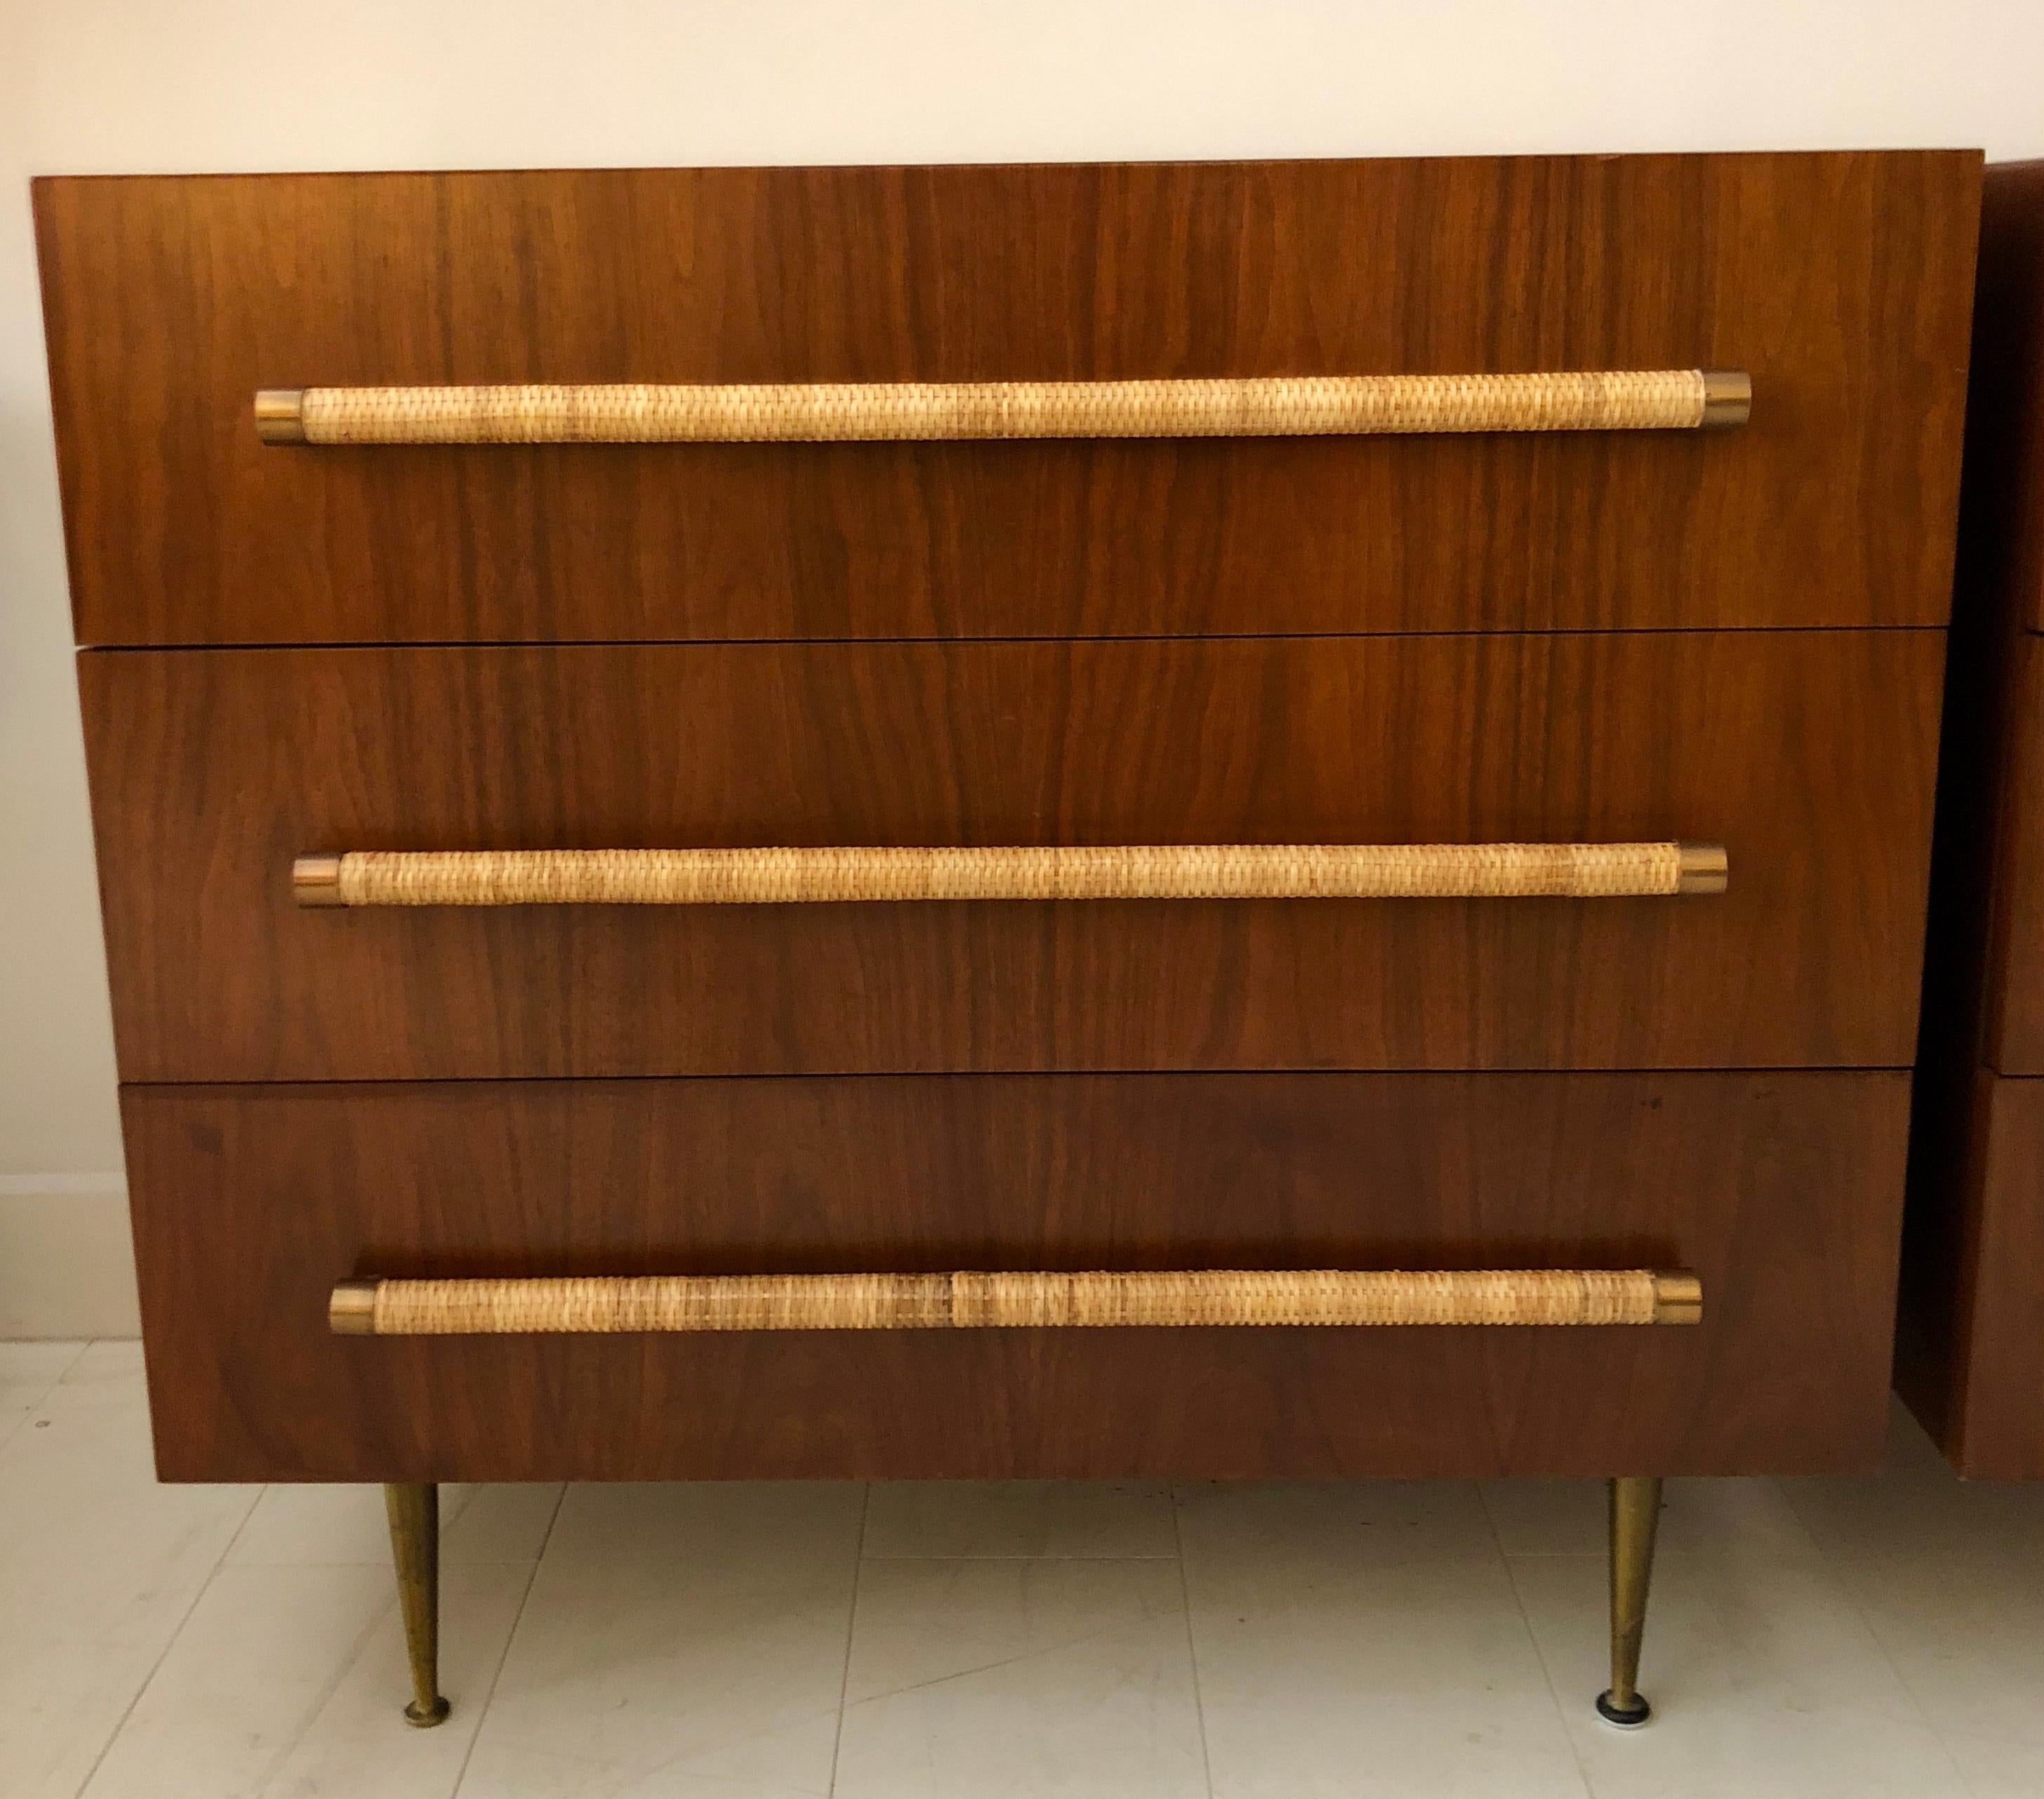 Pair of Classic T.H. Robsjohn-Gibbings for Widdicomb three-drawer cabinets in beautiful original finish dark walnut, with brass legs, and raffia cane wrapped handles. Signed with remnants of cloth Widdicomb label.